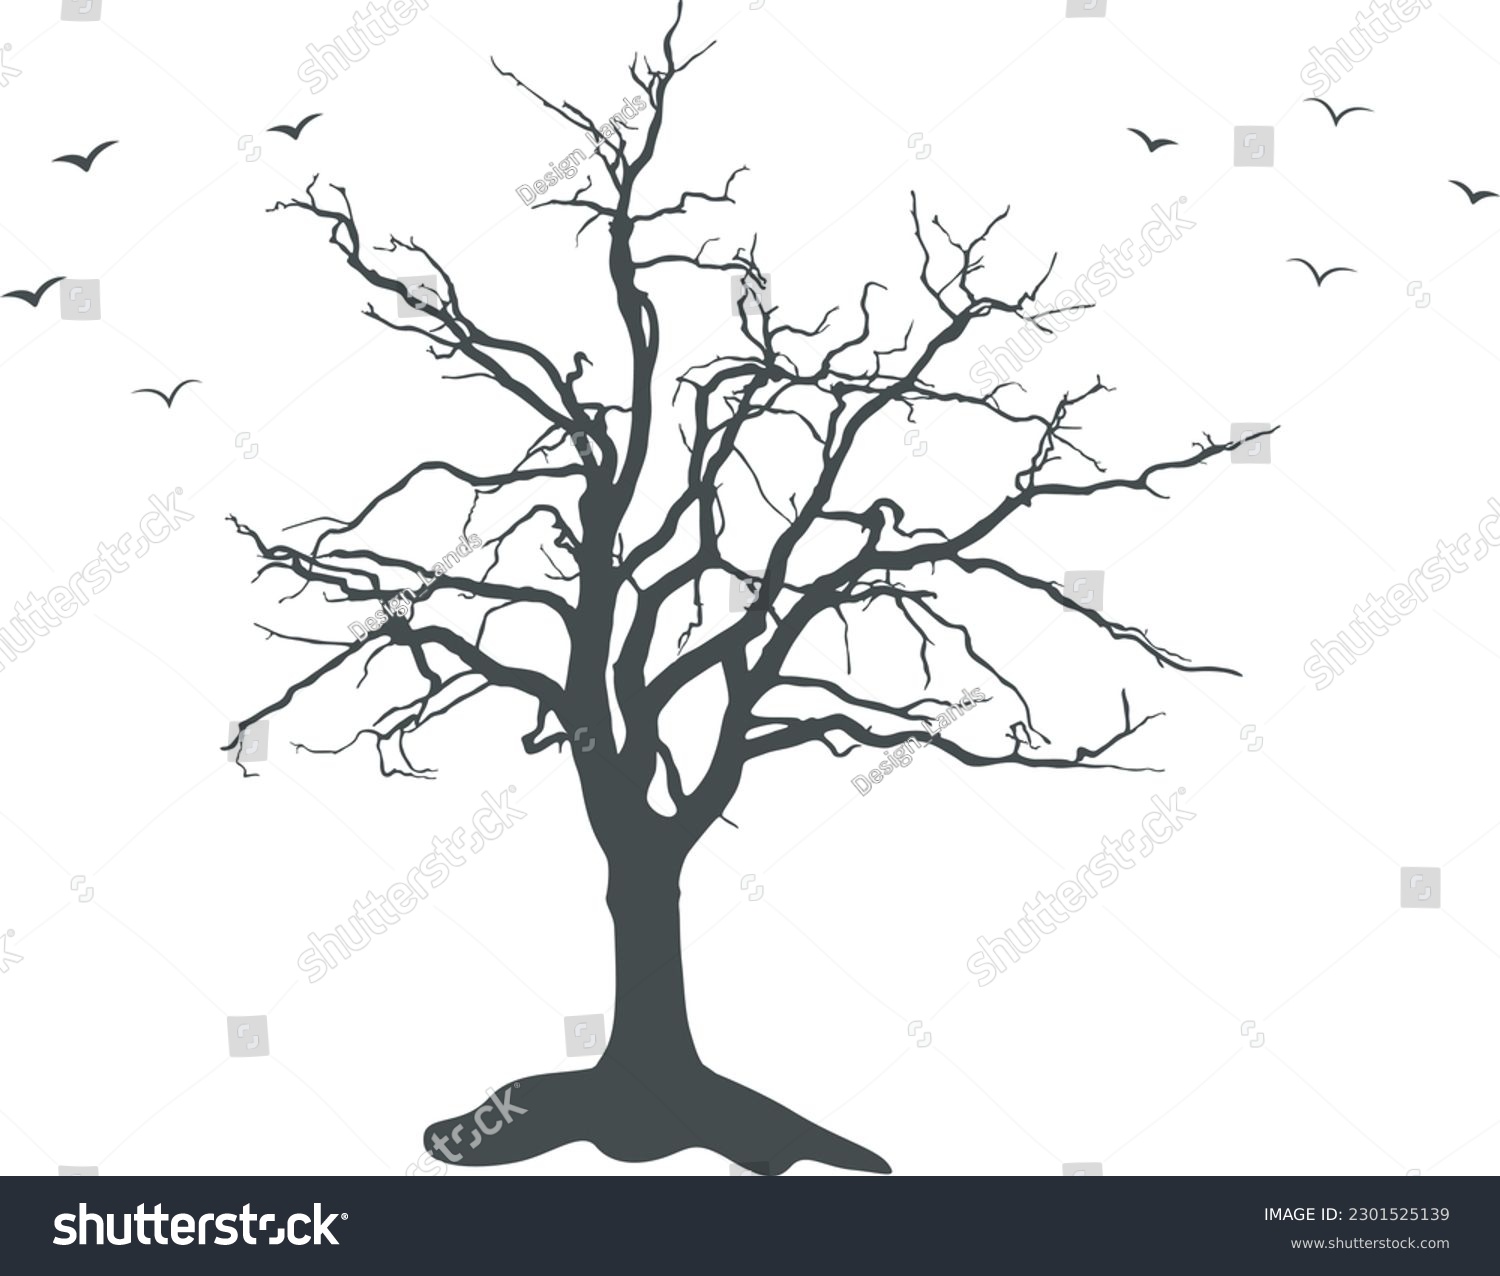 SVG of Scary dead tree silhouette, Tree silhouette, Bare silhouette, Tree SVG, Tree icon. svg